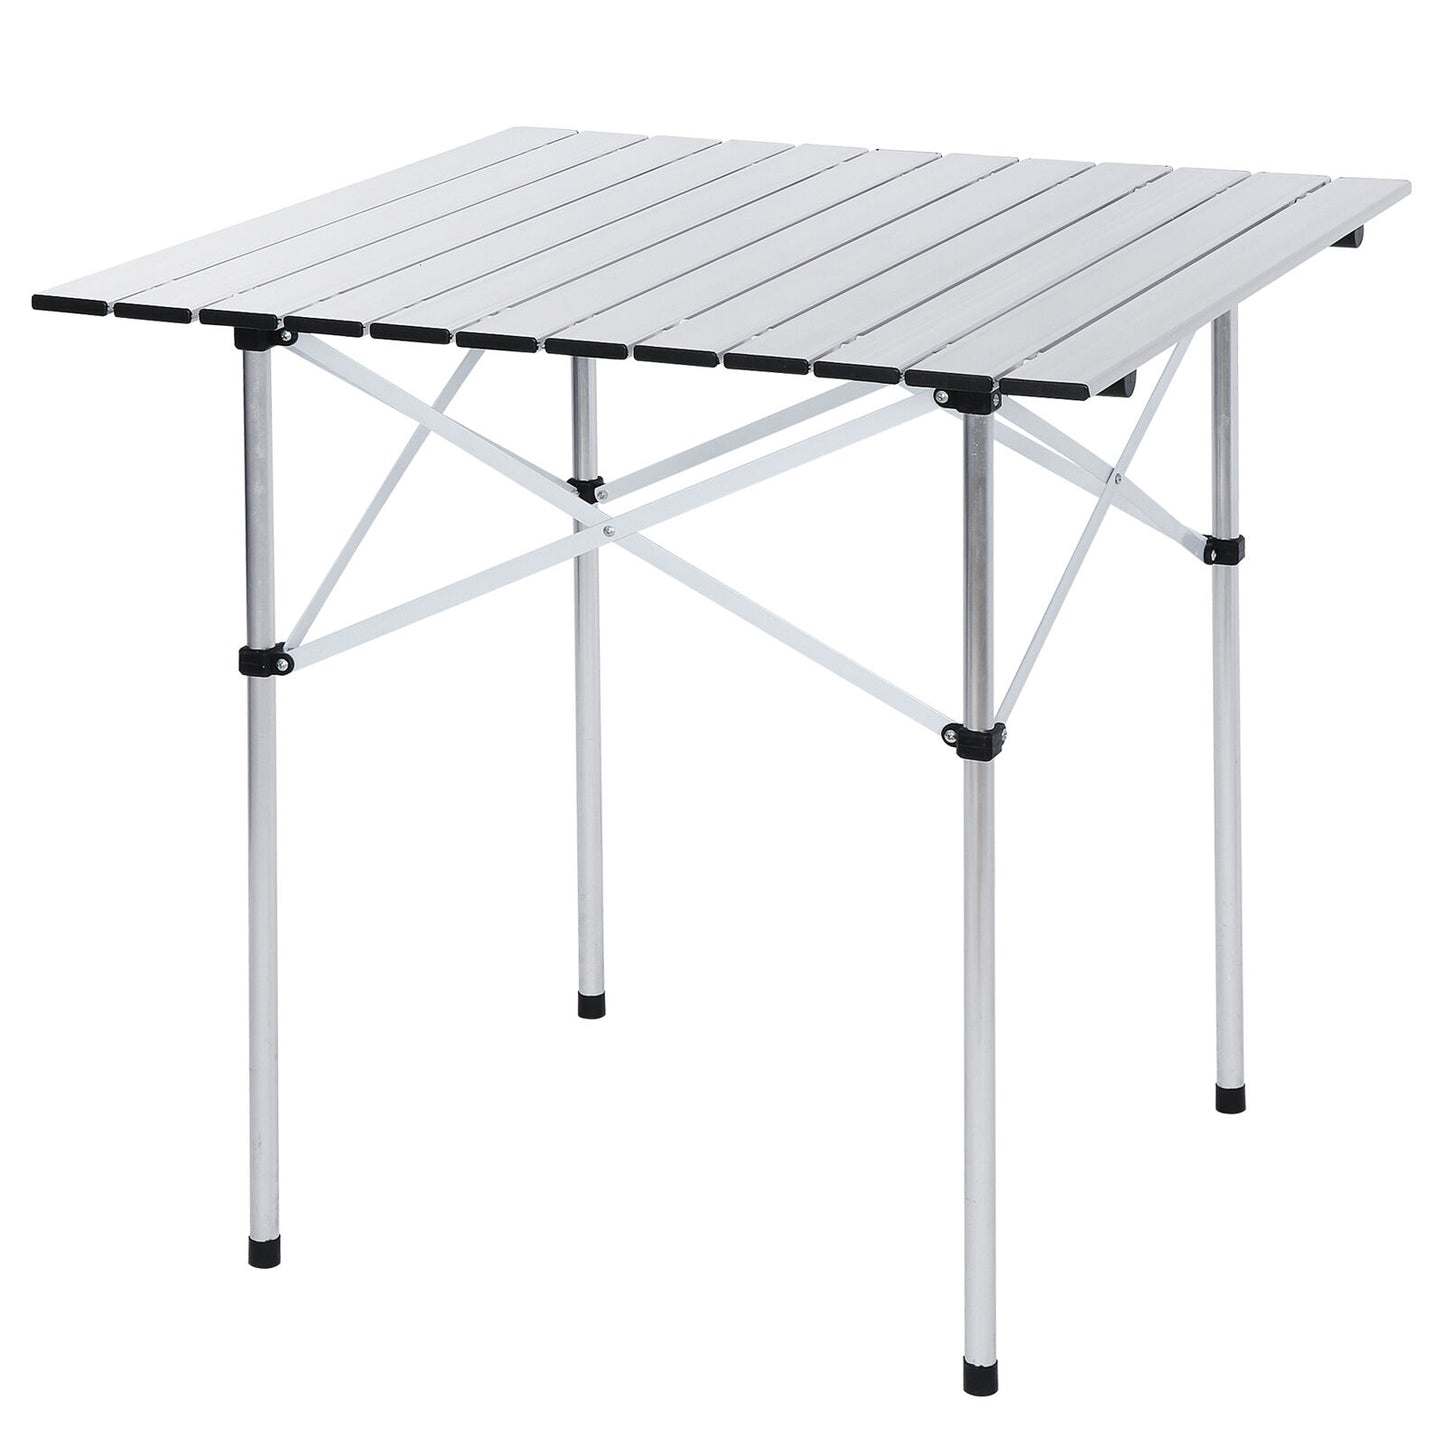 Portable Folding Aluminum Roll Up Table Outdoor Camping Table Picnic Outdoor